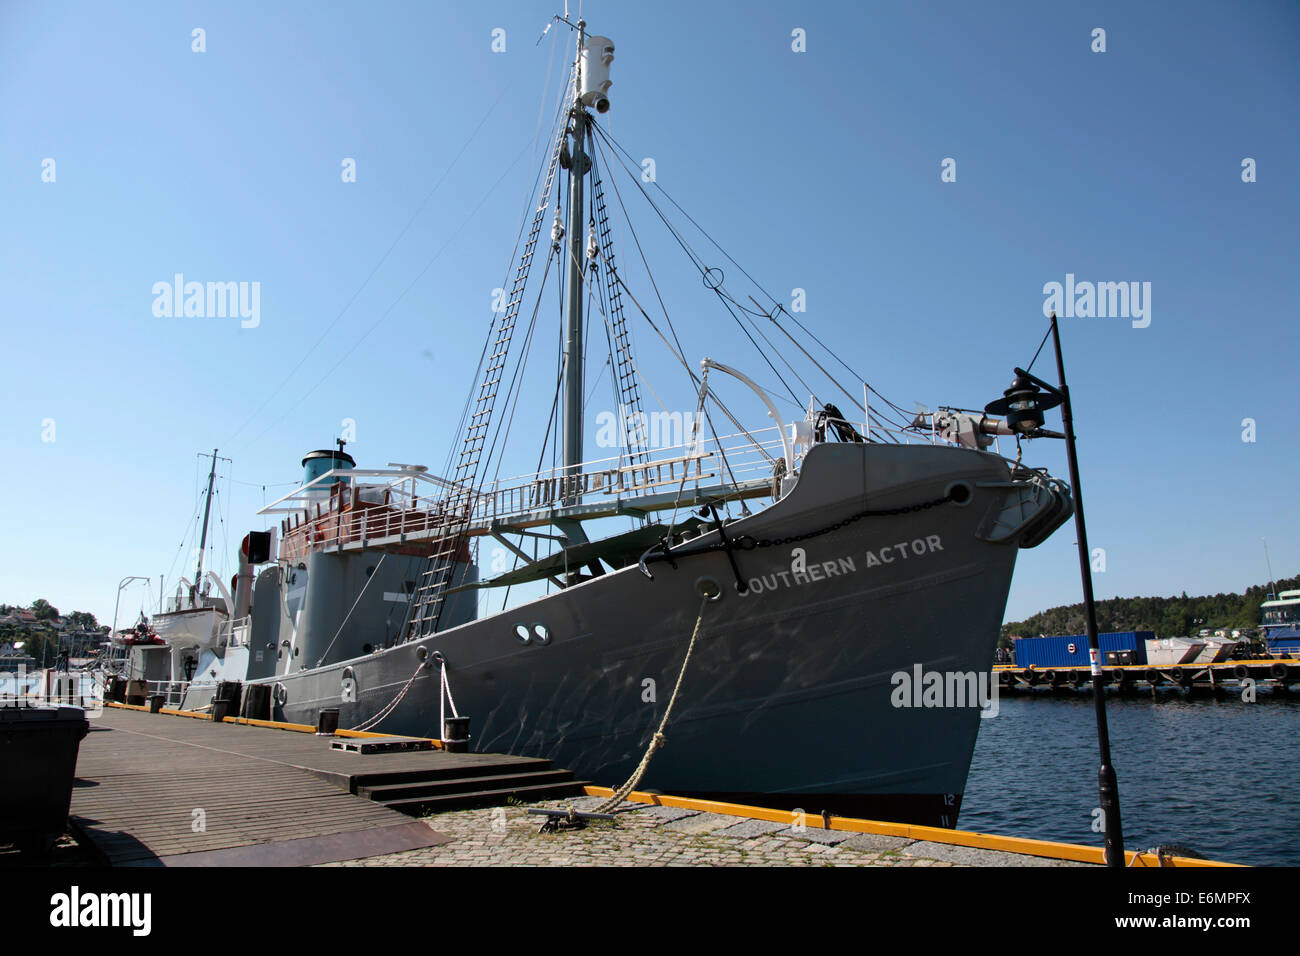 Whaling ship Southern Actor in Sandefjord, Norway. Today it is a museum ship. Untill 1968 Sandefjord was the center of whaling in Norway. The whaling brought prosperity.  Photo: Klaus Nowottnick Date: June 7, 2014 Stock Photo